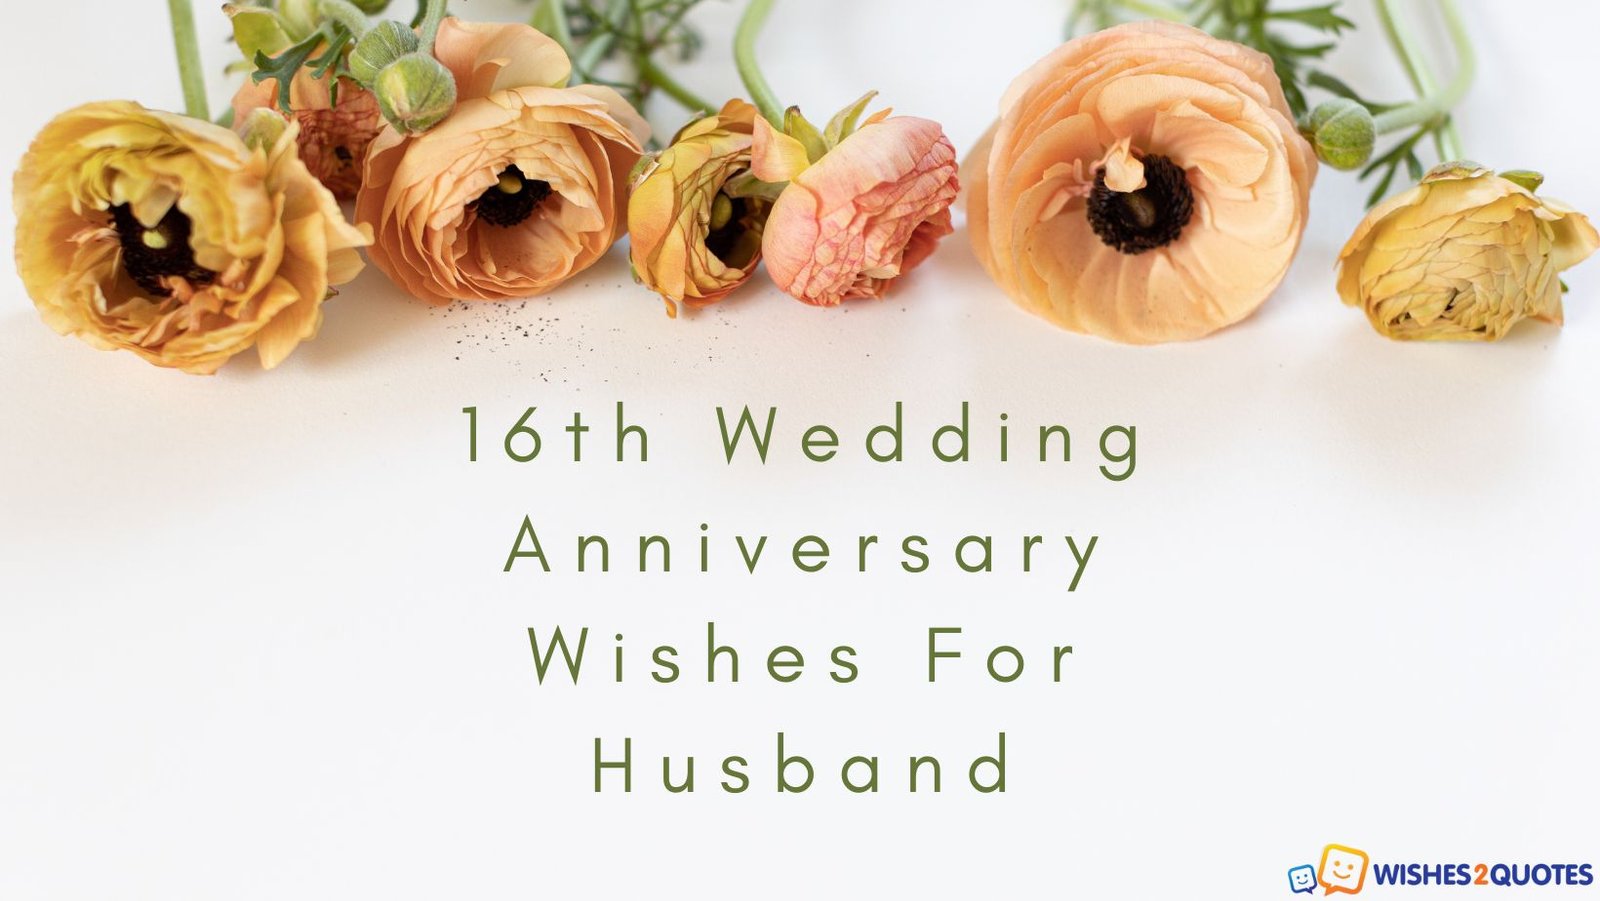 16th Wedding Anniversary Wishes For Husband